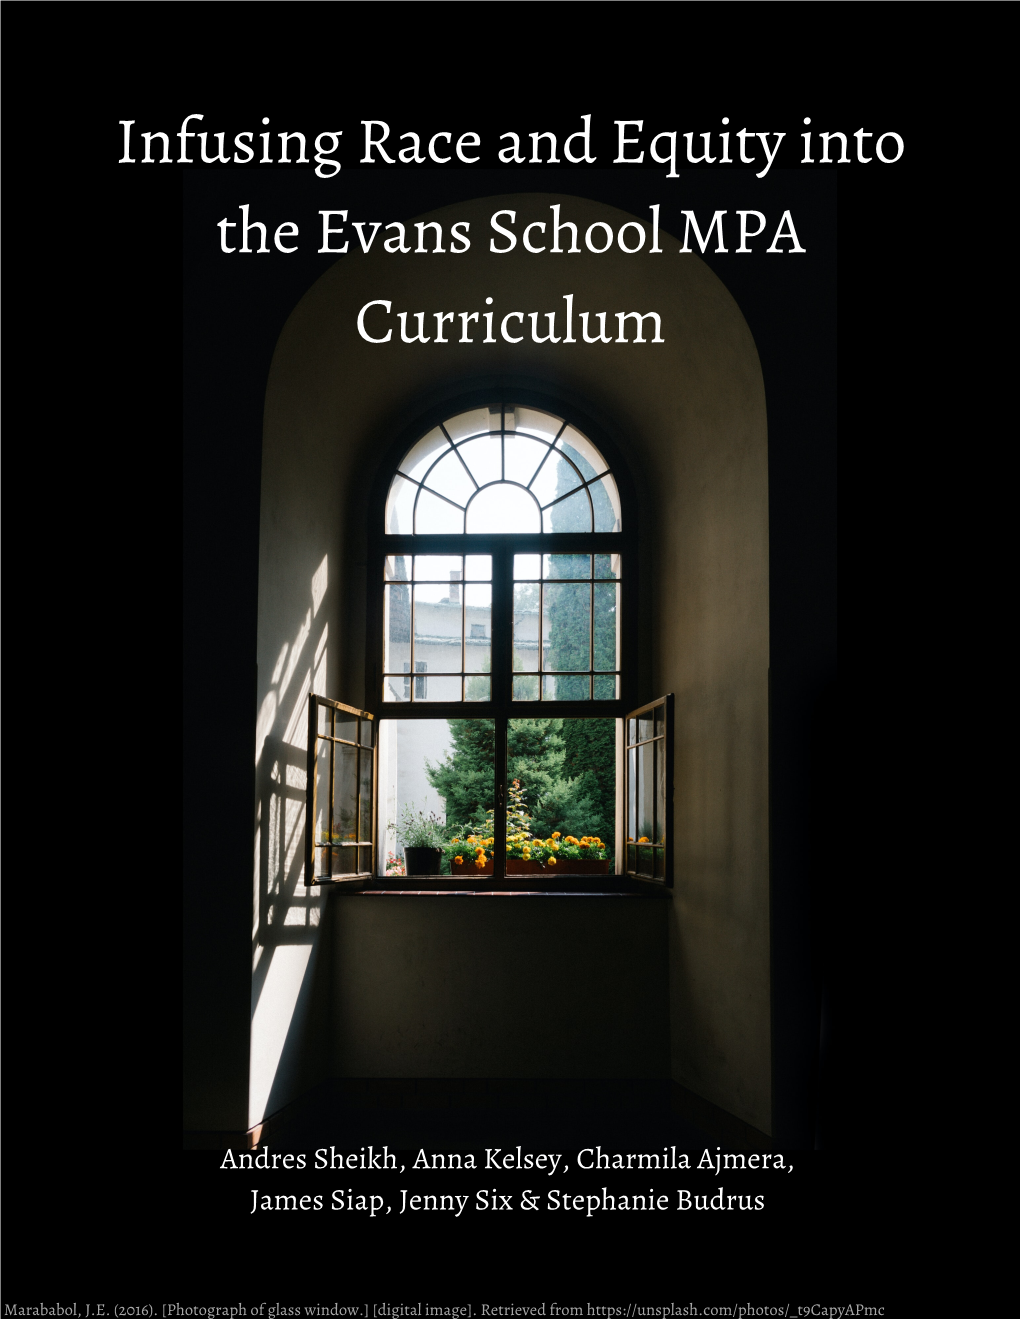 Infusing Race and Equity Into the Evans School MPA Curriculum.Pdf